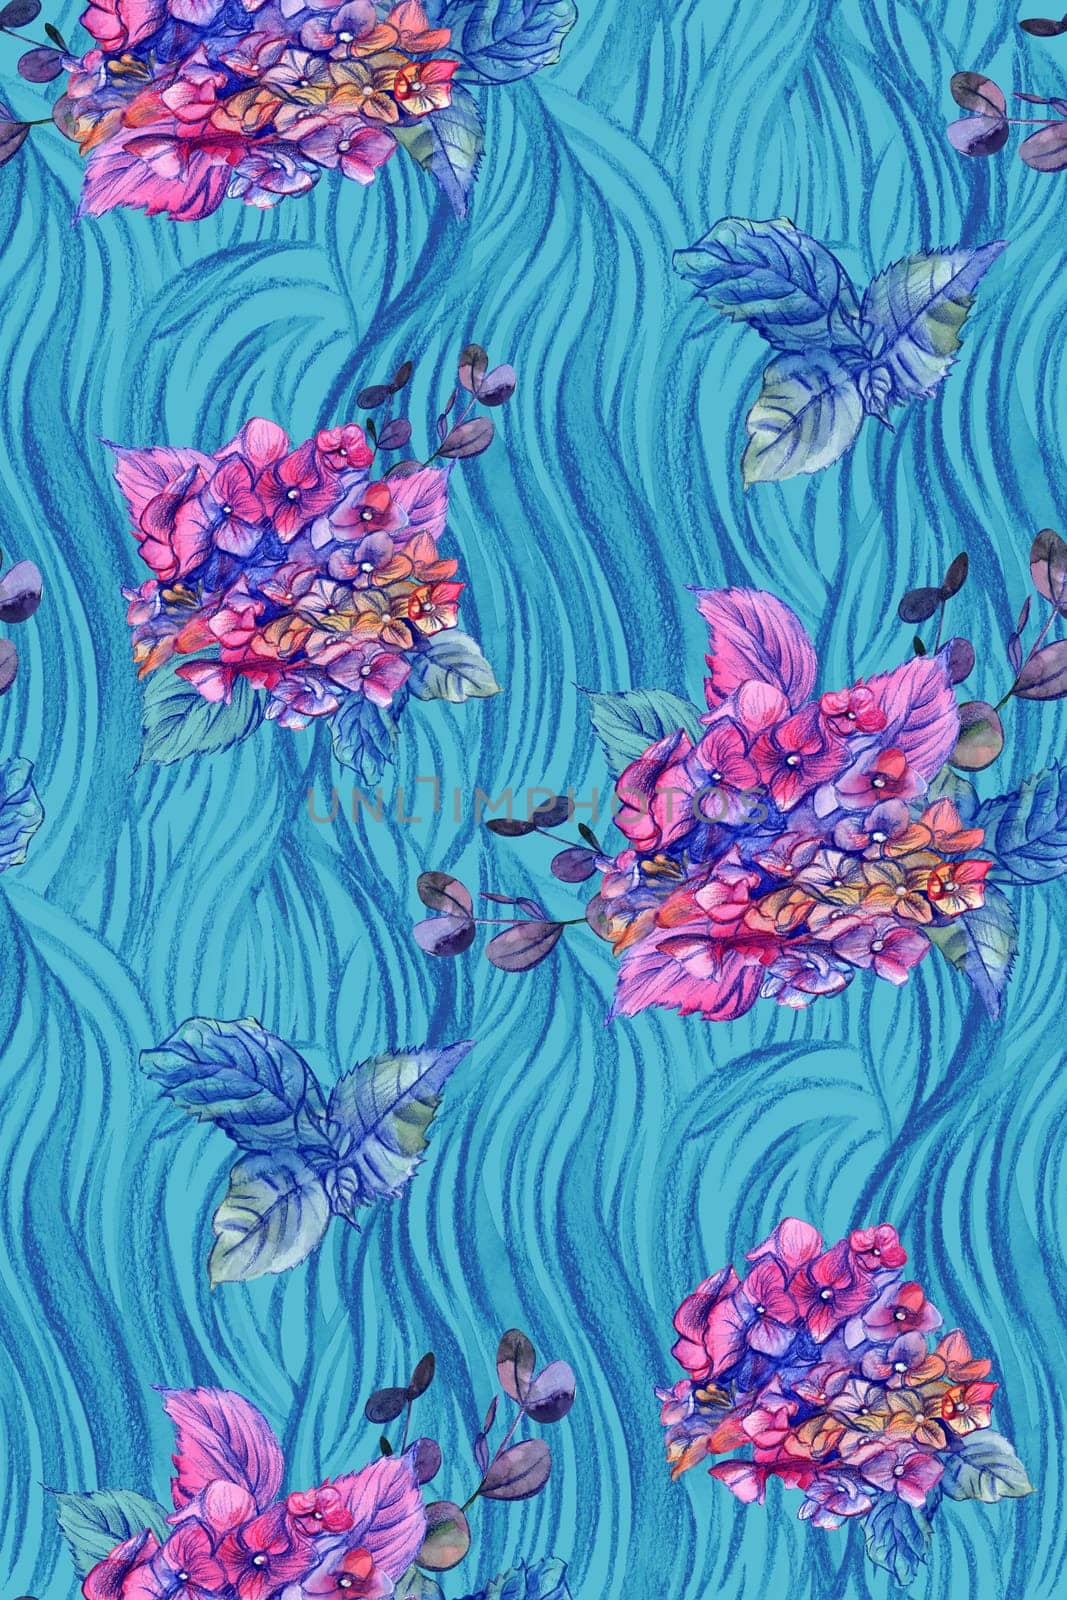 Turquoise seamless floral watercolor pattern with pink hydrangeas drawn by MarinaVoyush